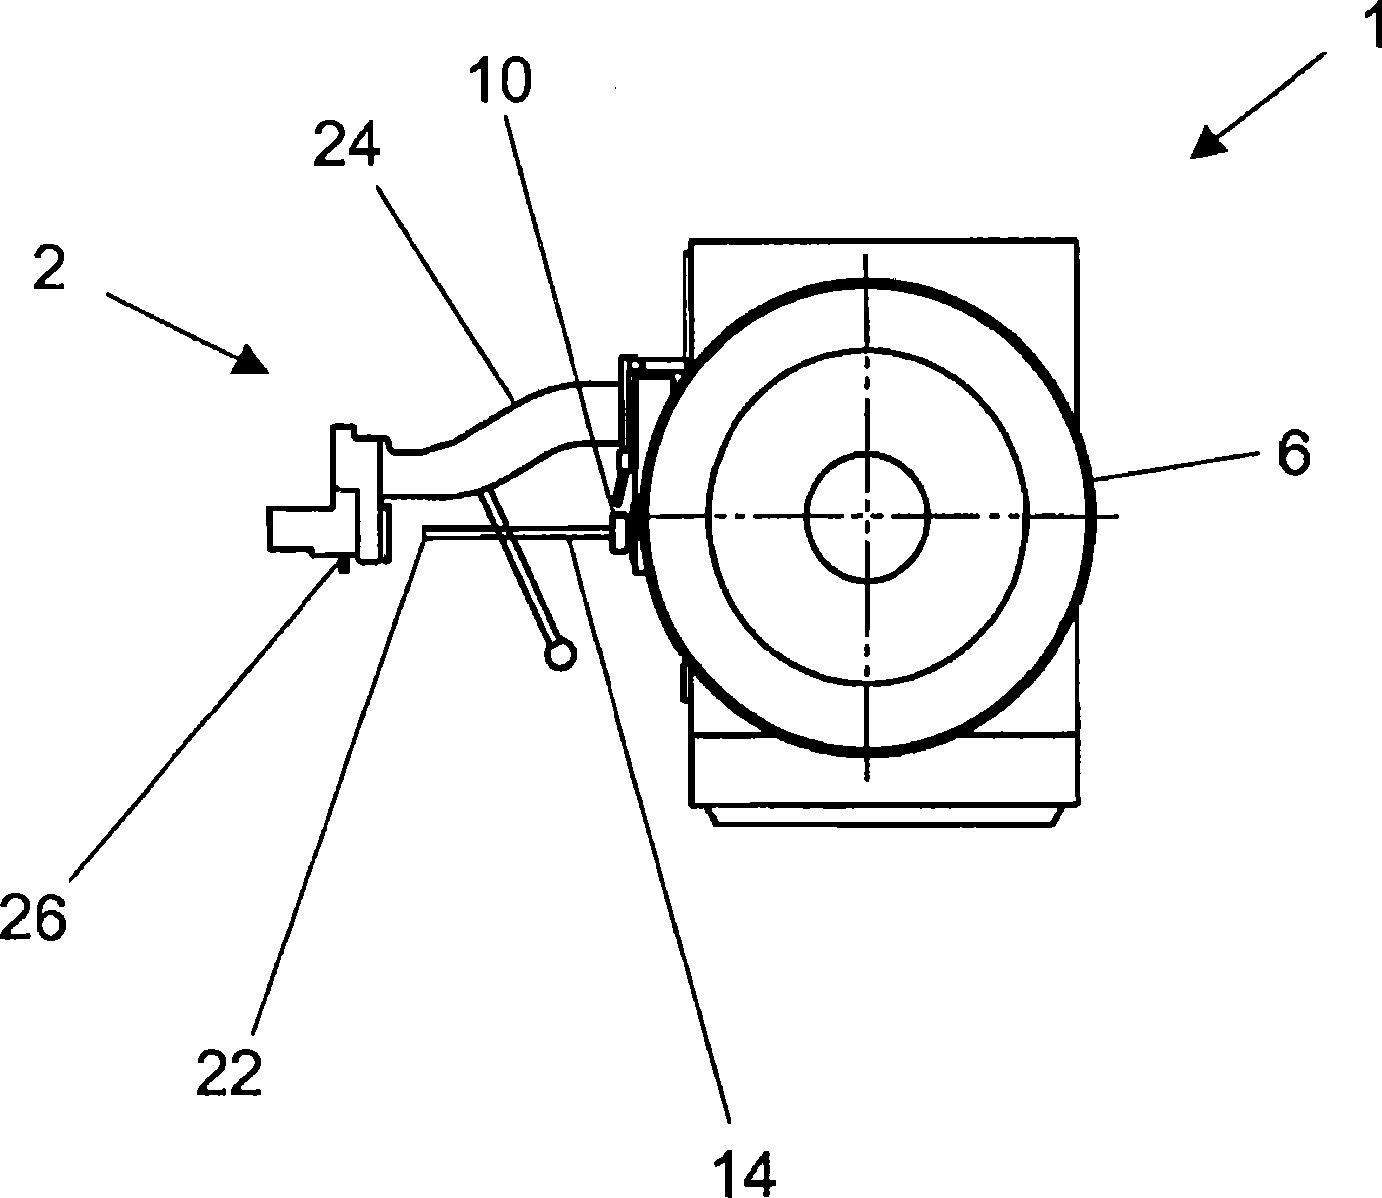 Filling apparatus, machine and method for filling of casings, particularly sausage casings